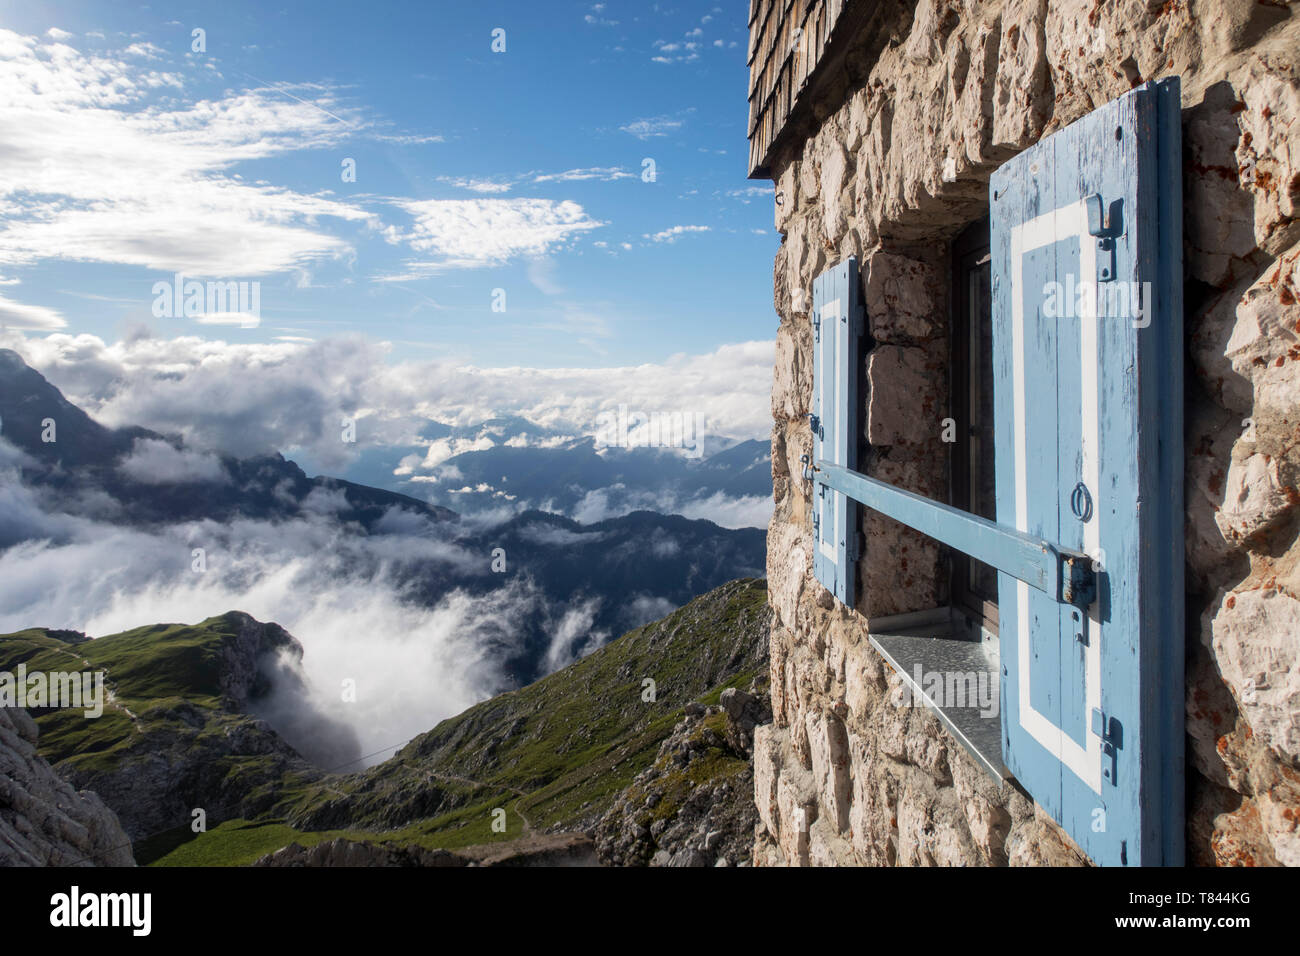 window of the meiler hut in the alps Stock Photo